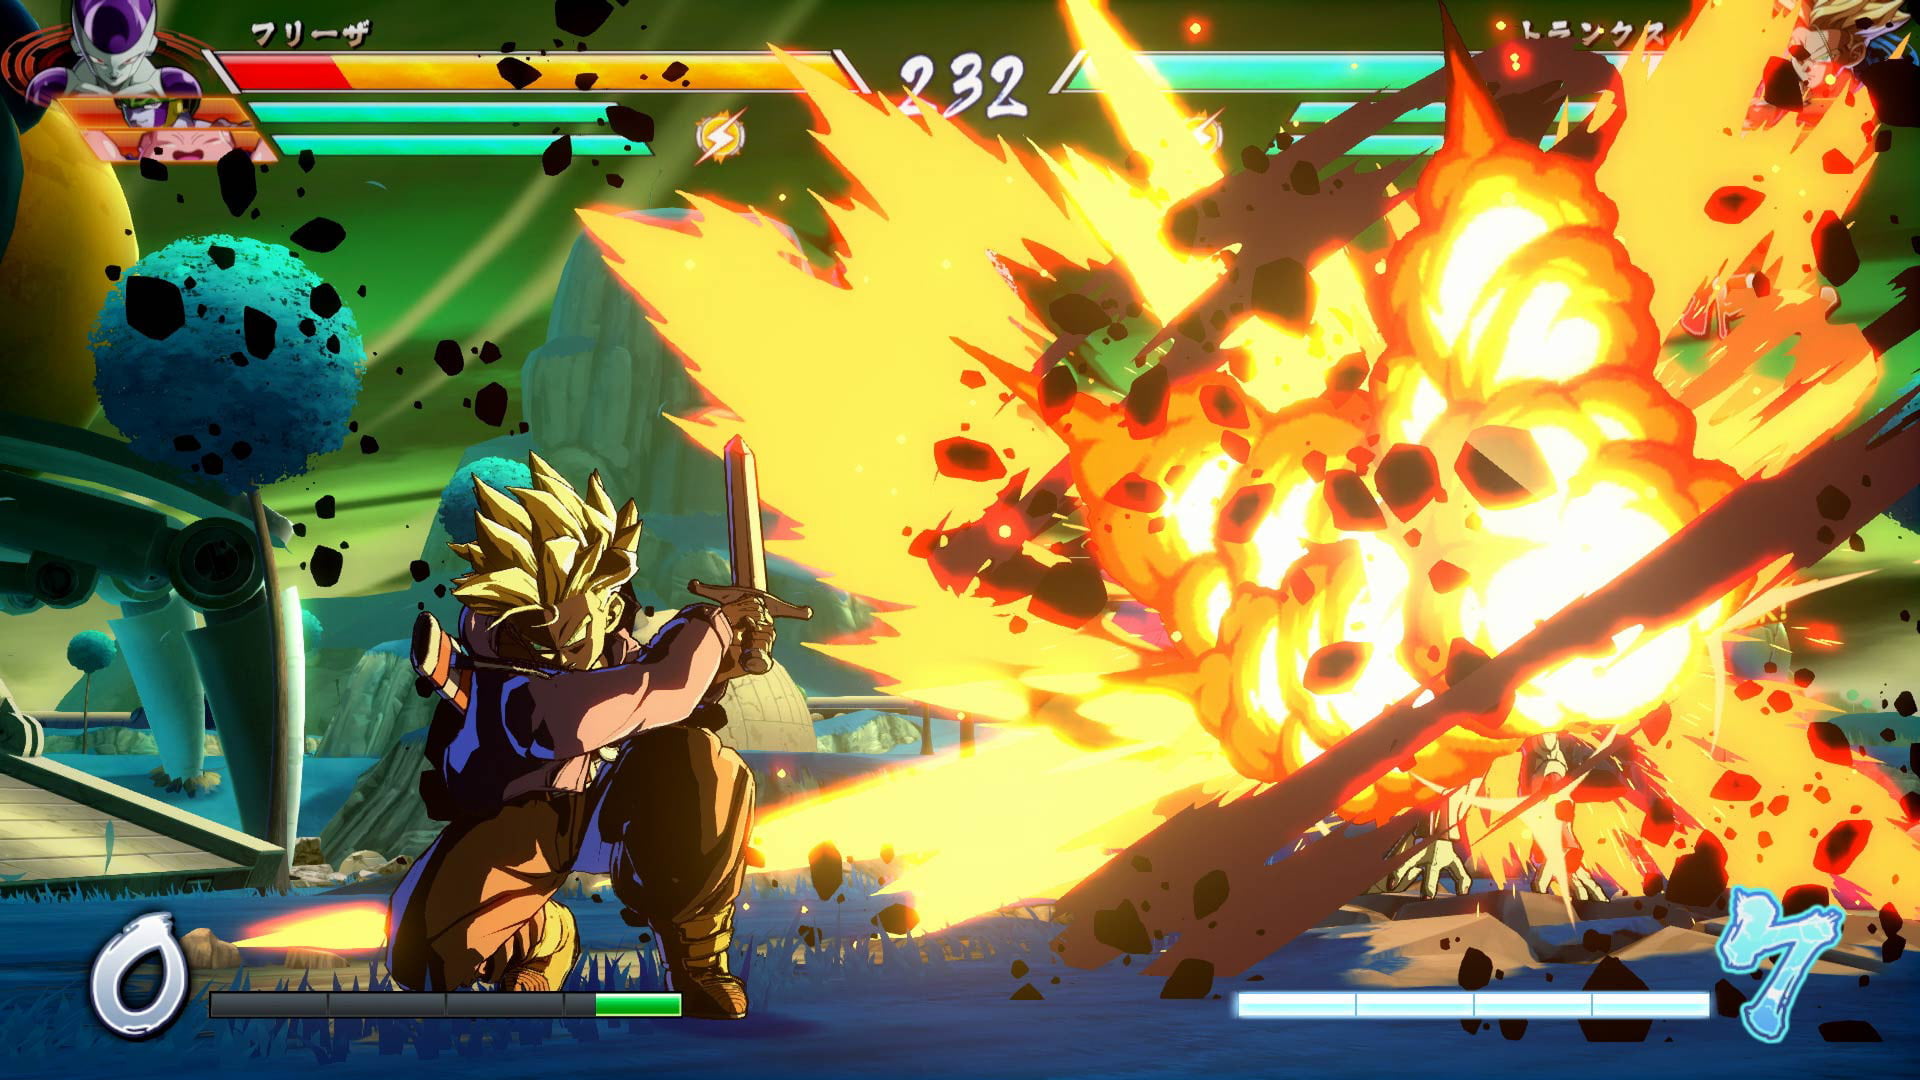 Free Updates Are Coming To Dragon Ball FighterZ